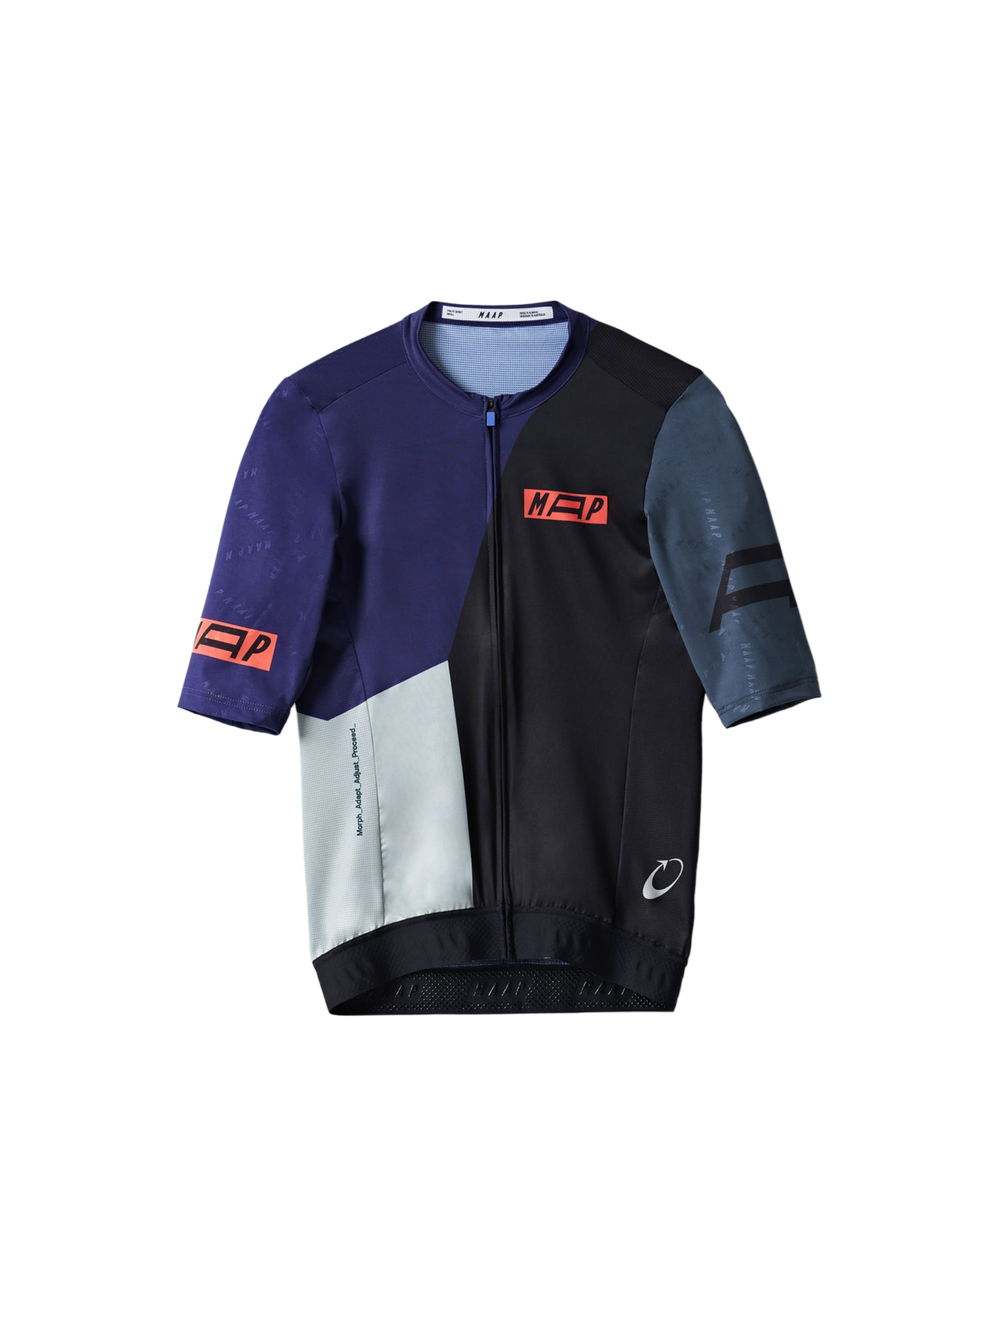 Product Image for Form Pro Hex Jersey